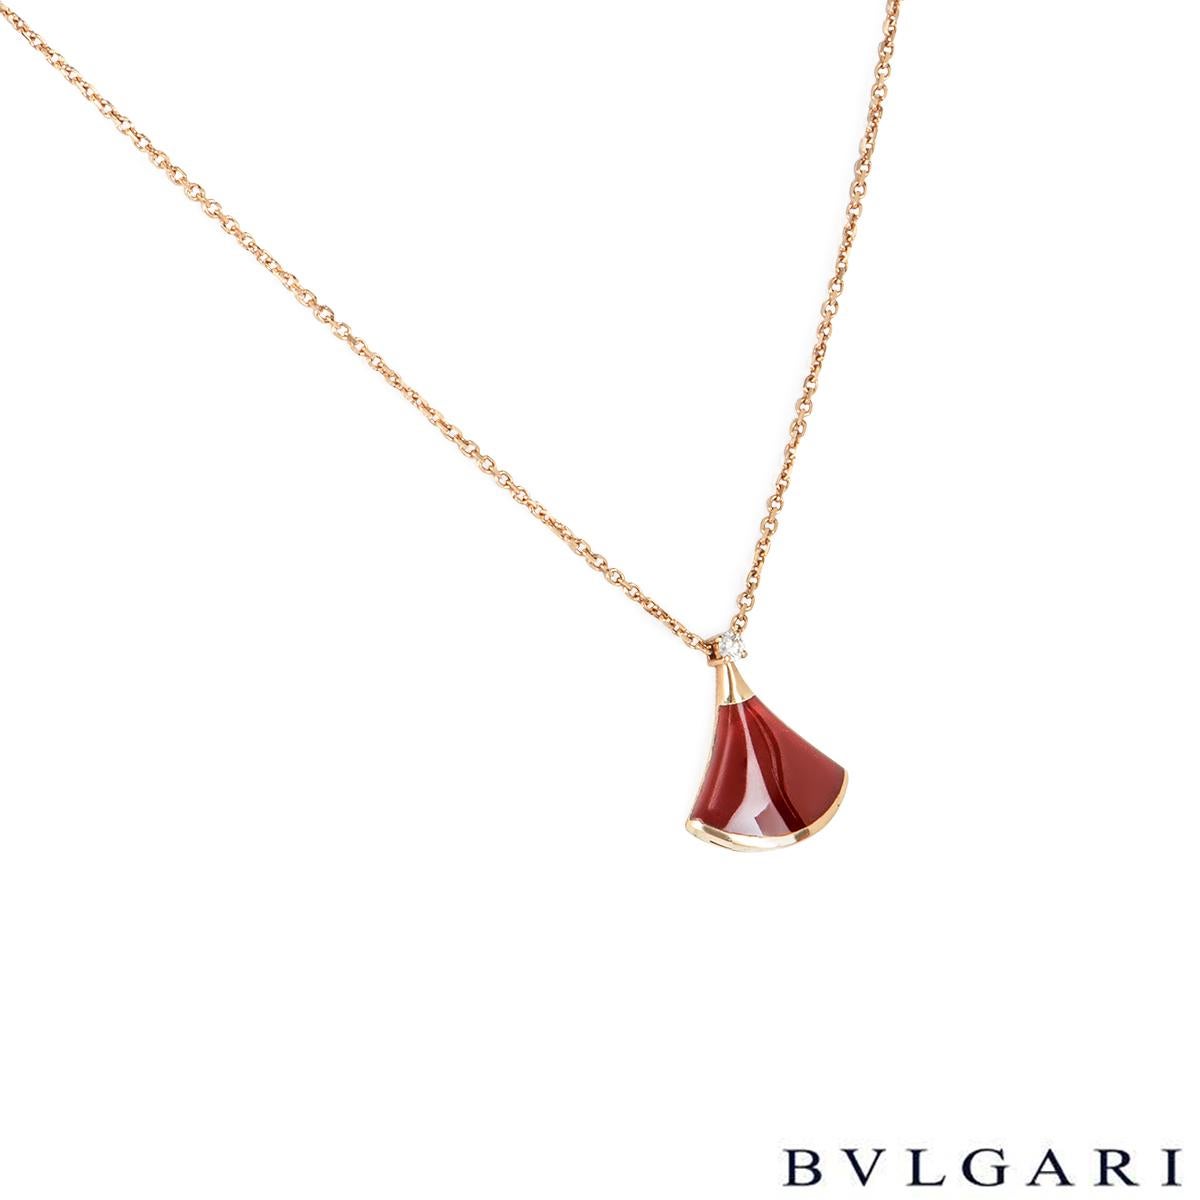 An elegant 18k rose gold carnelian and diamond jewellery suite by Bvlgari from the Divas' Dream collection. The pendant features a carnelian fan shaped motif with a single round brilliant cut diamond set above weighing 0.03ct, is suspended from a